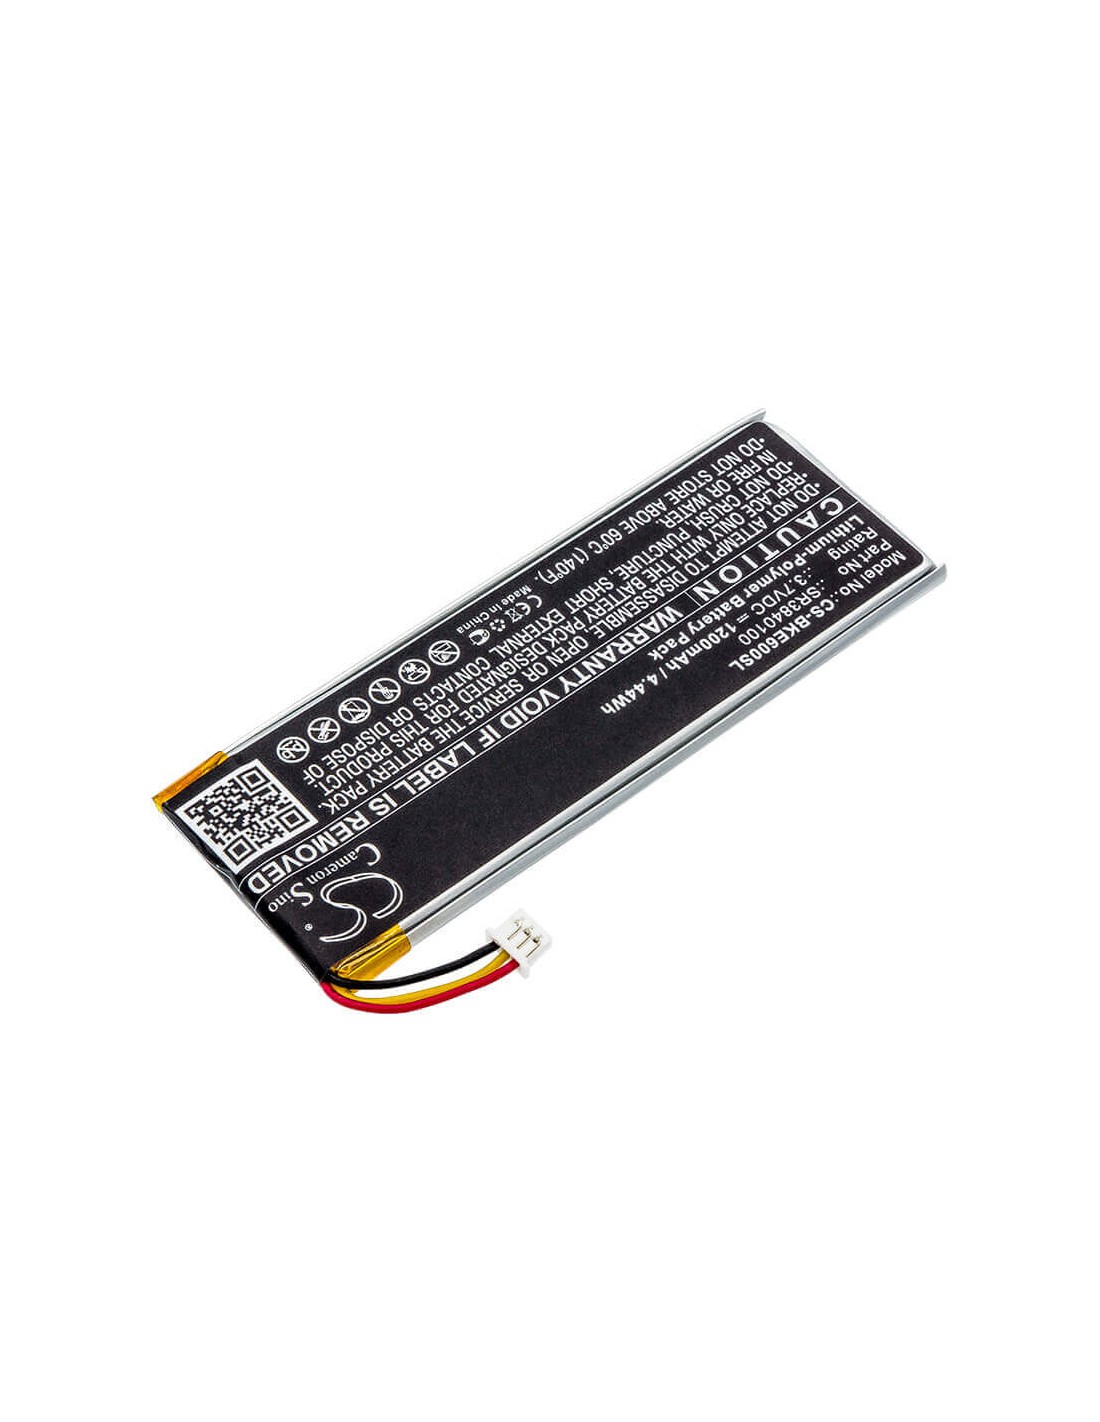 Battery for Becker, Active 6, Active 6 Lmu, Active 6 Lmu Plus 3.7V, 1200mAh - 4.44Wh